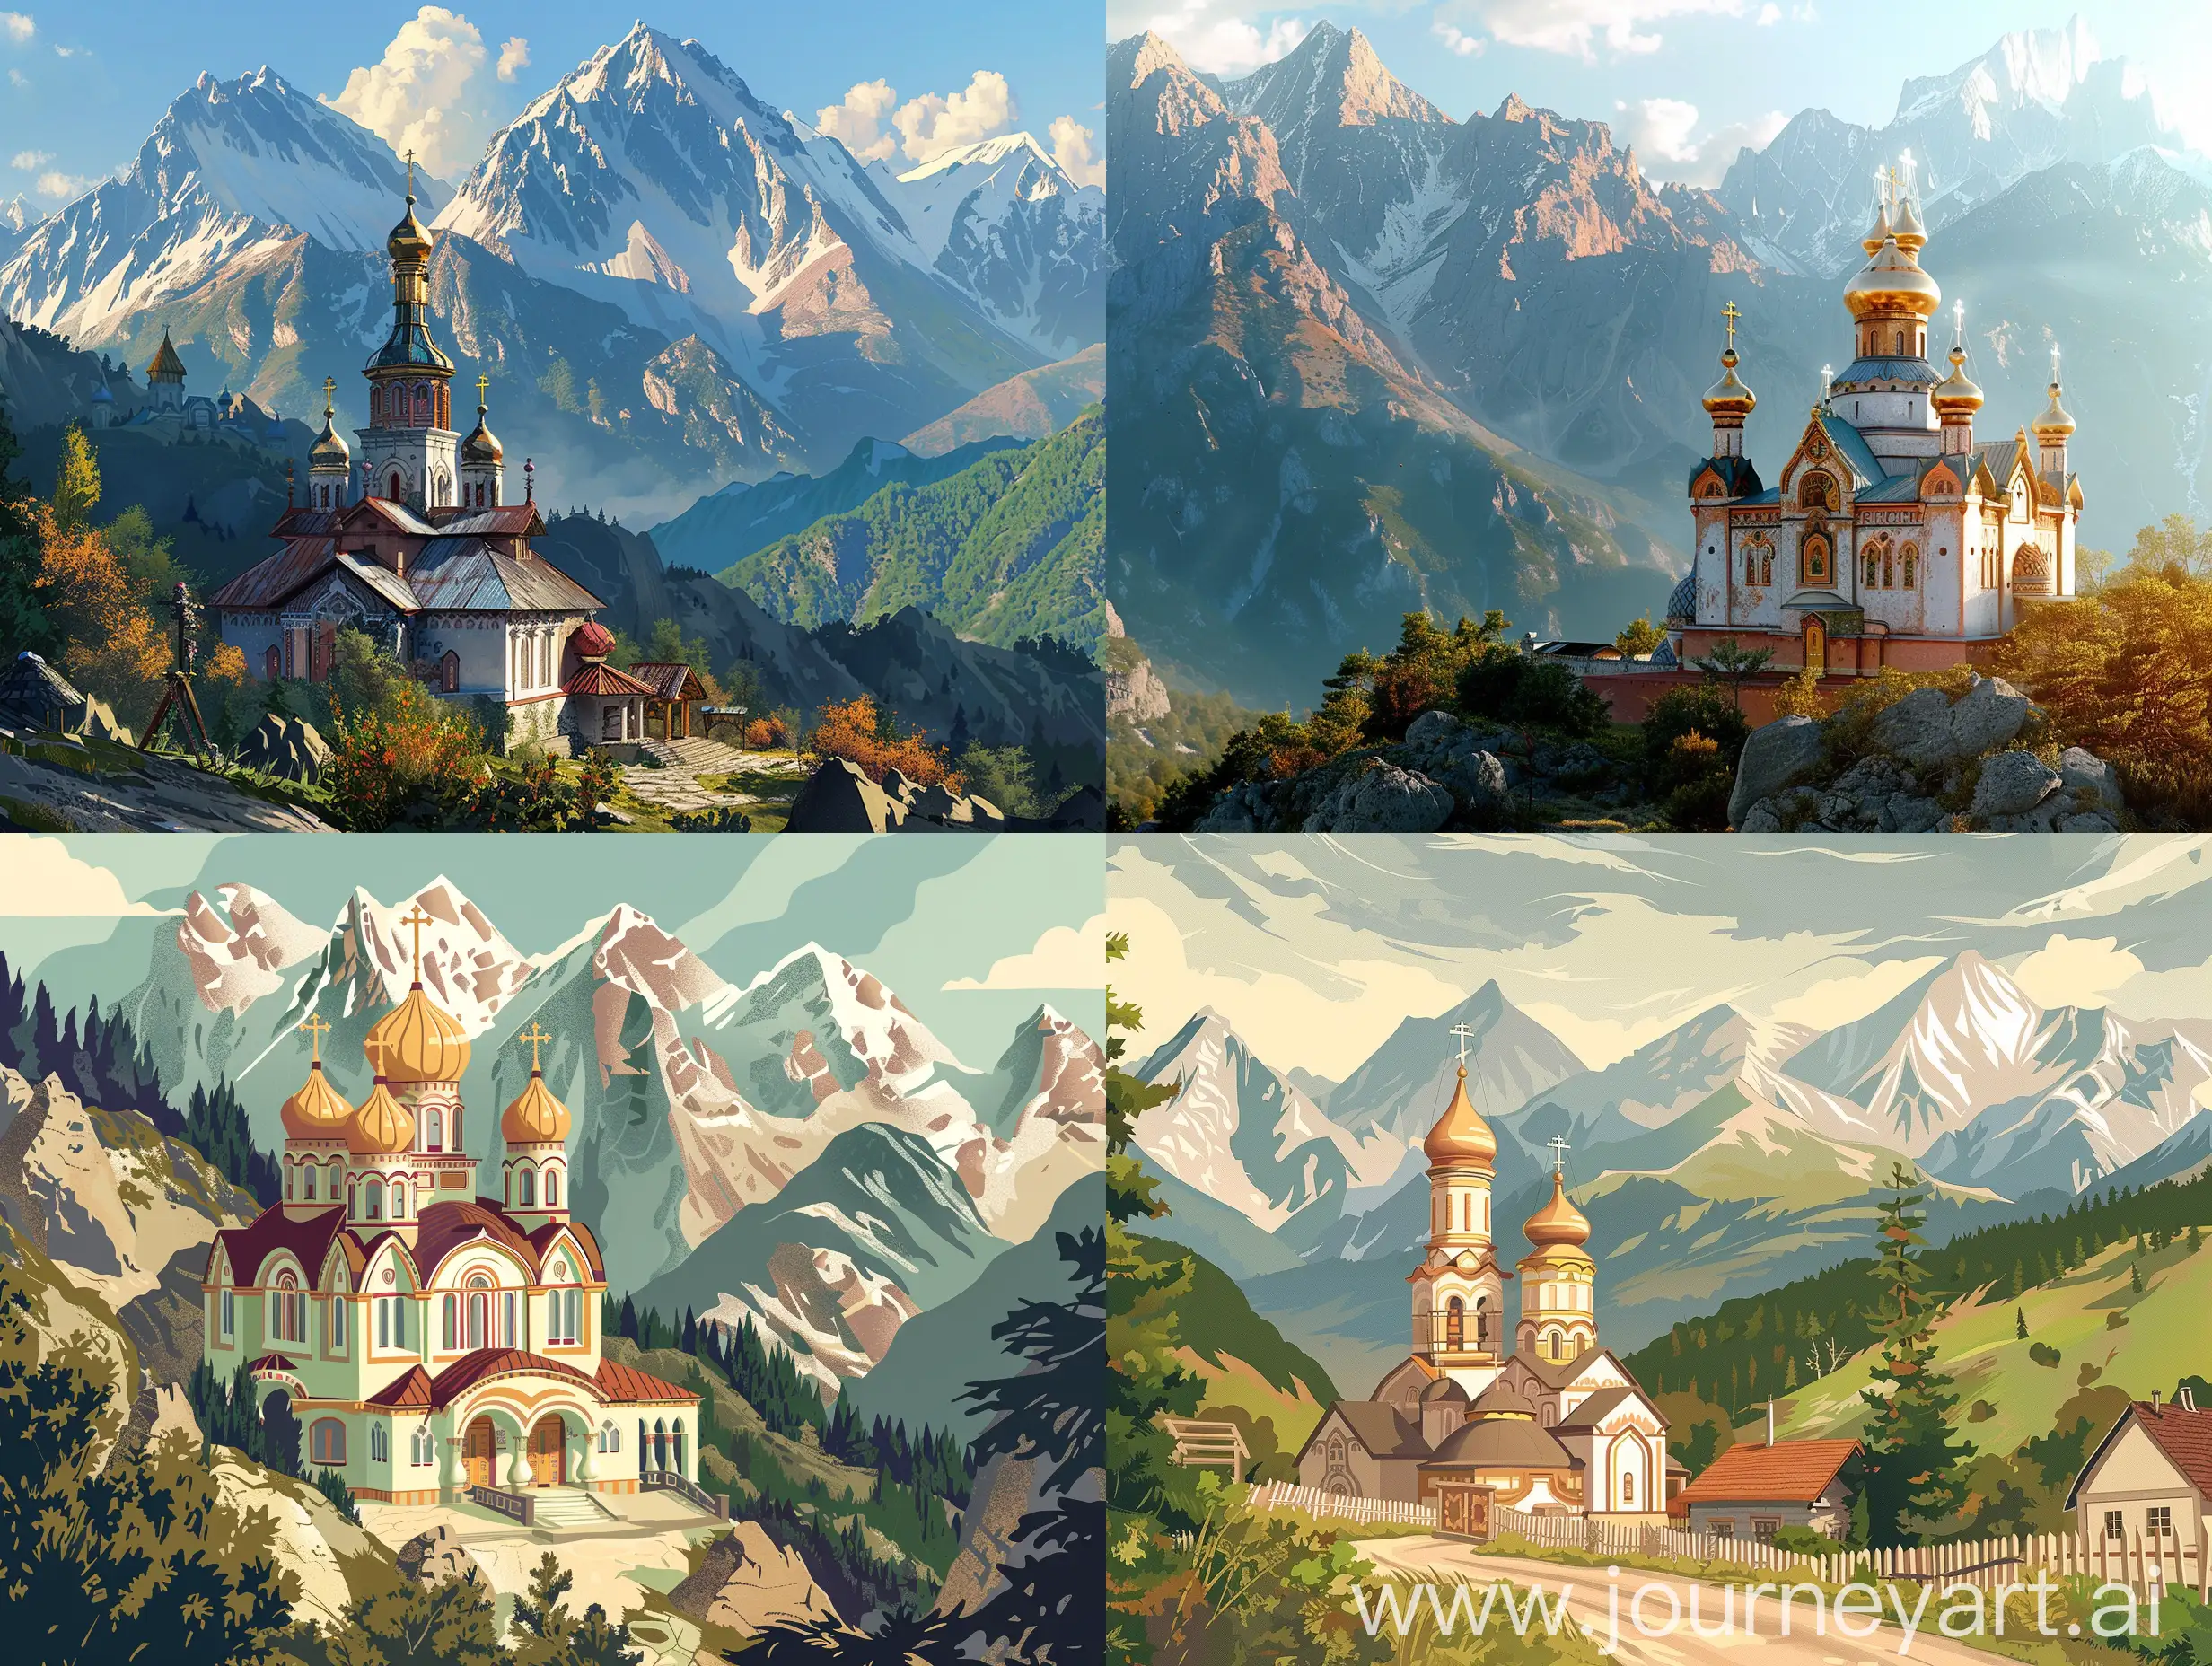 Create a bright and picturesque scene featuring a Russian cultural heritage site, such as a traditional Russian church or monastery, surrounded by mountainous terrain reminiscent of the Balkan Mountains. Use a lighter, warm, and welcoming color scheme. Incorporate elements of Russian and Serbian symbolism to emphasize the theme of preserving Russian heritage in Serbia and promoting it in Russia. Ensure the background mountains add a majestic and serene atmosphere to the scene.